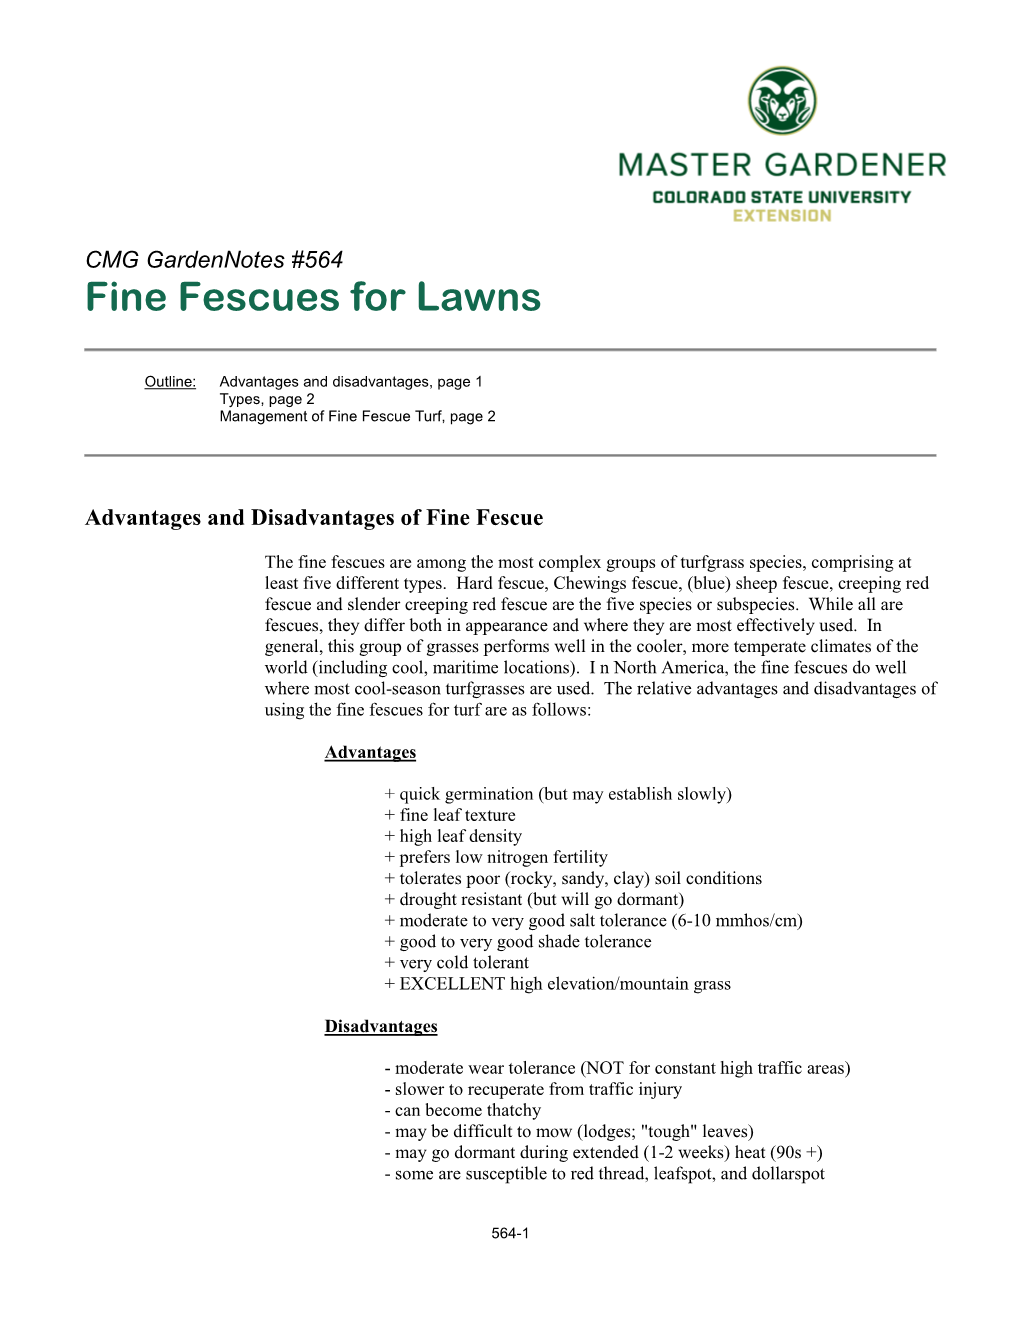 564, Fine Fescues for Lawns